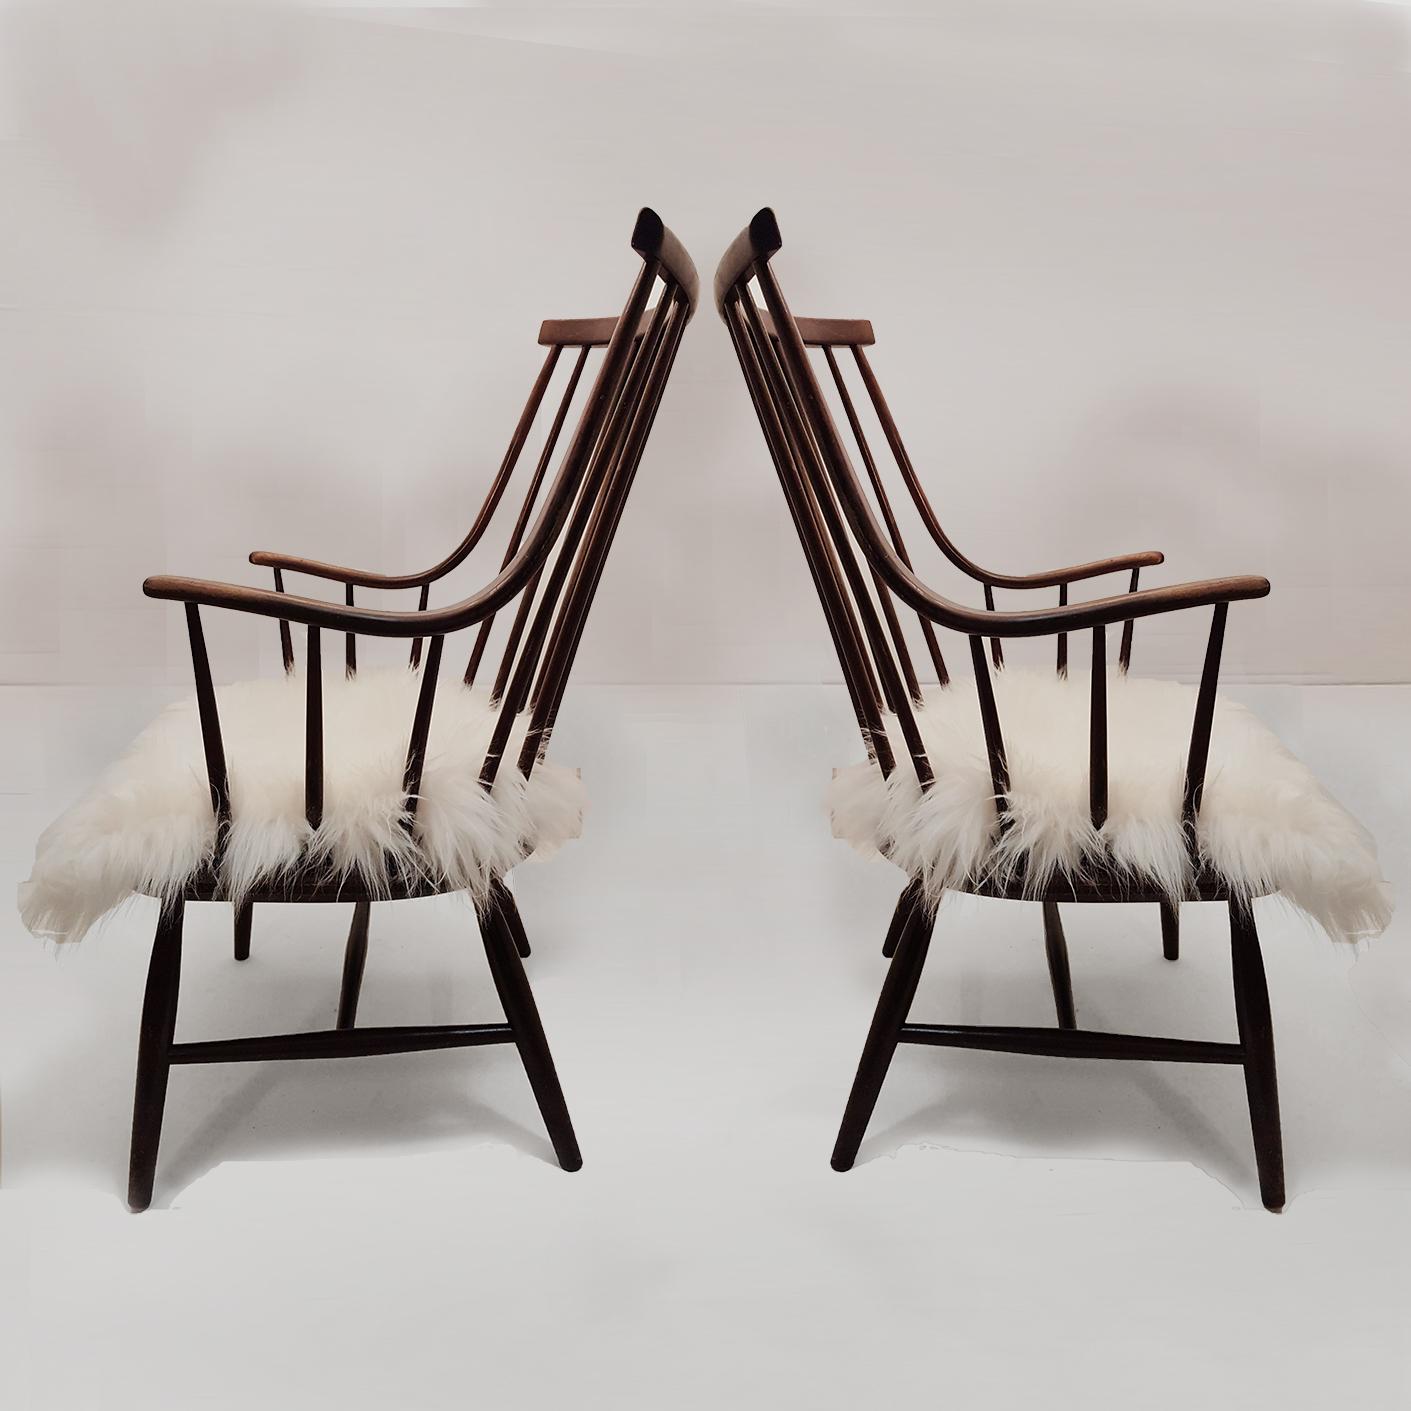 Two large armchairs, model 